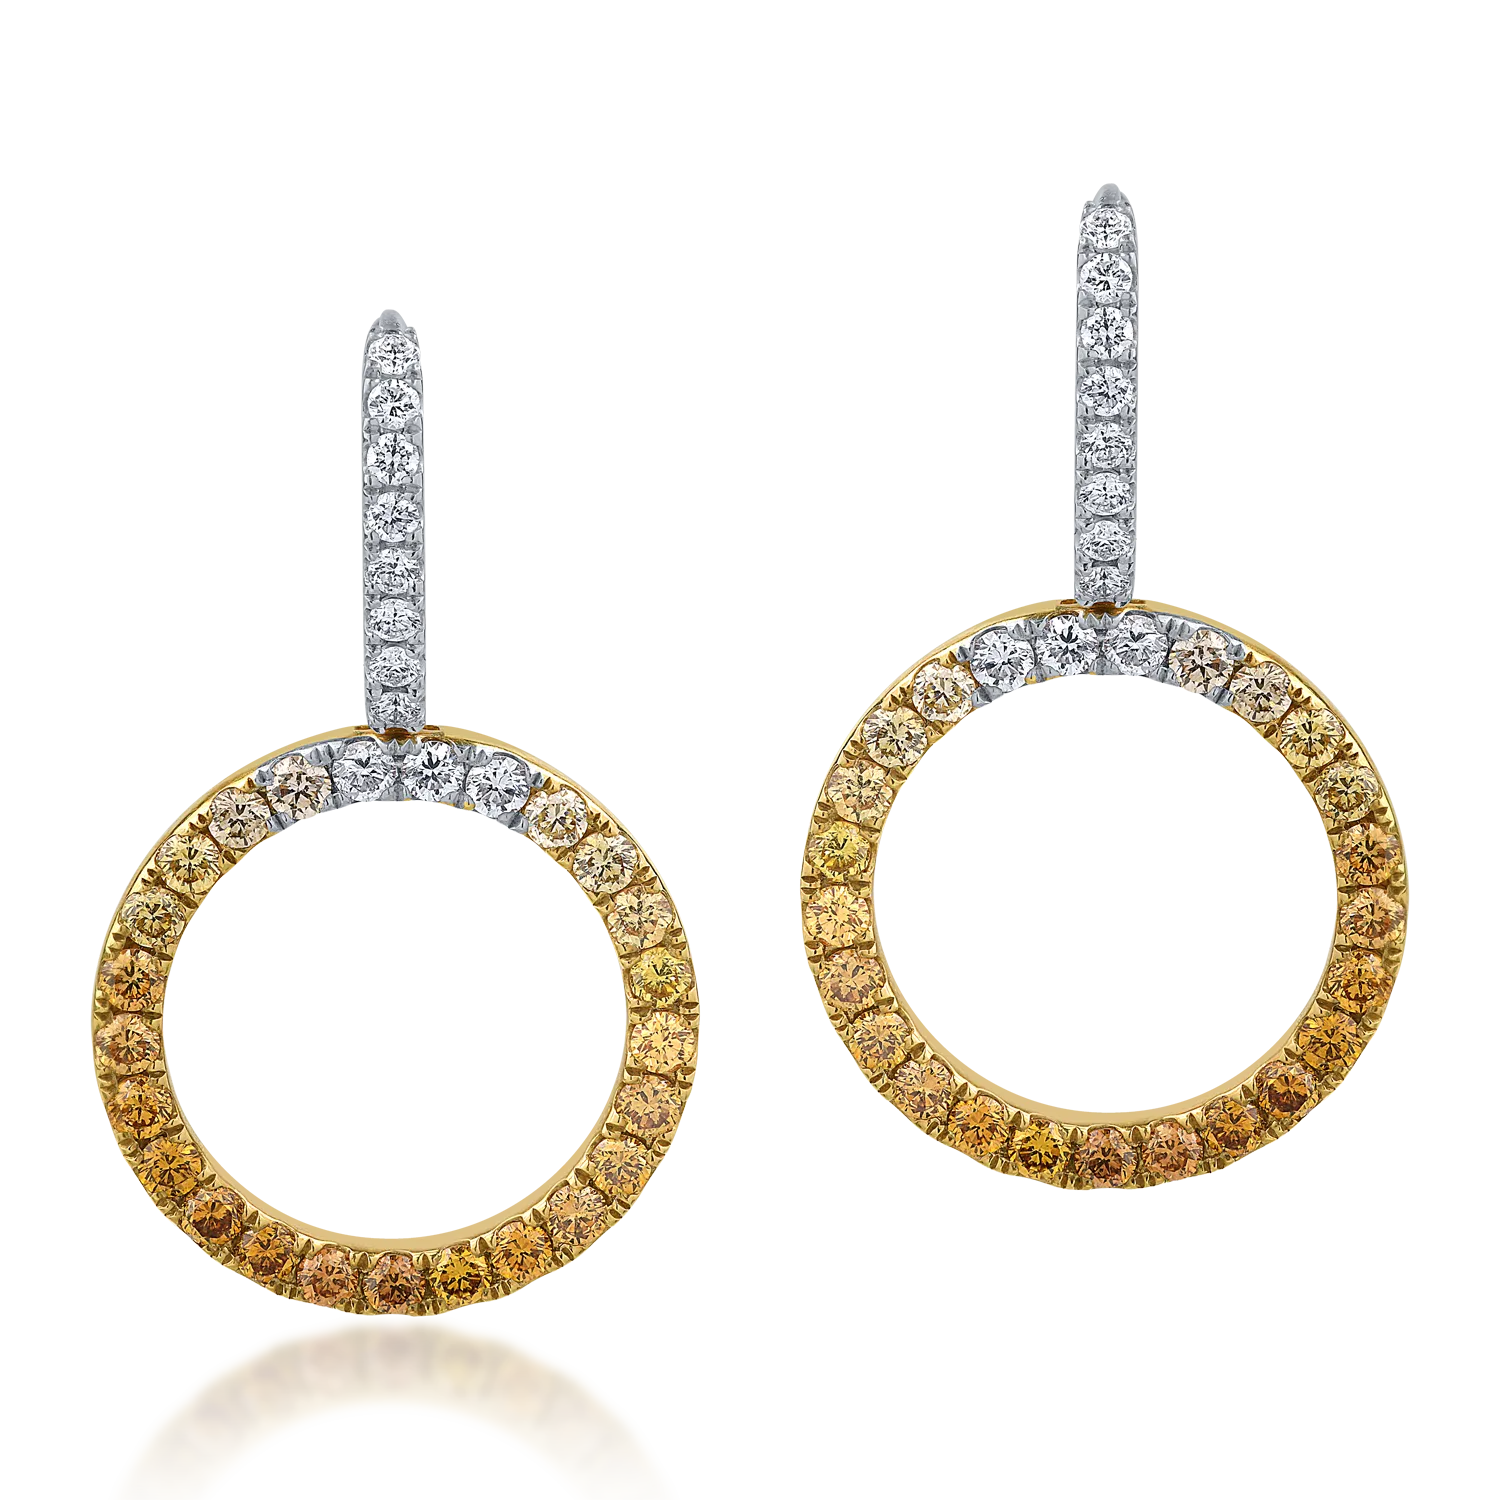 18K yellow-white gold earrings with 1.84ct diamonds